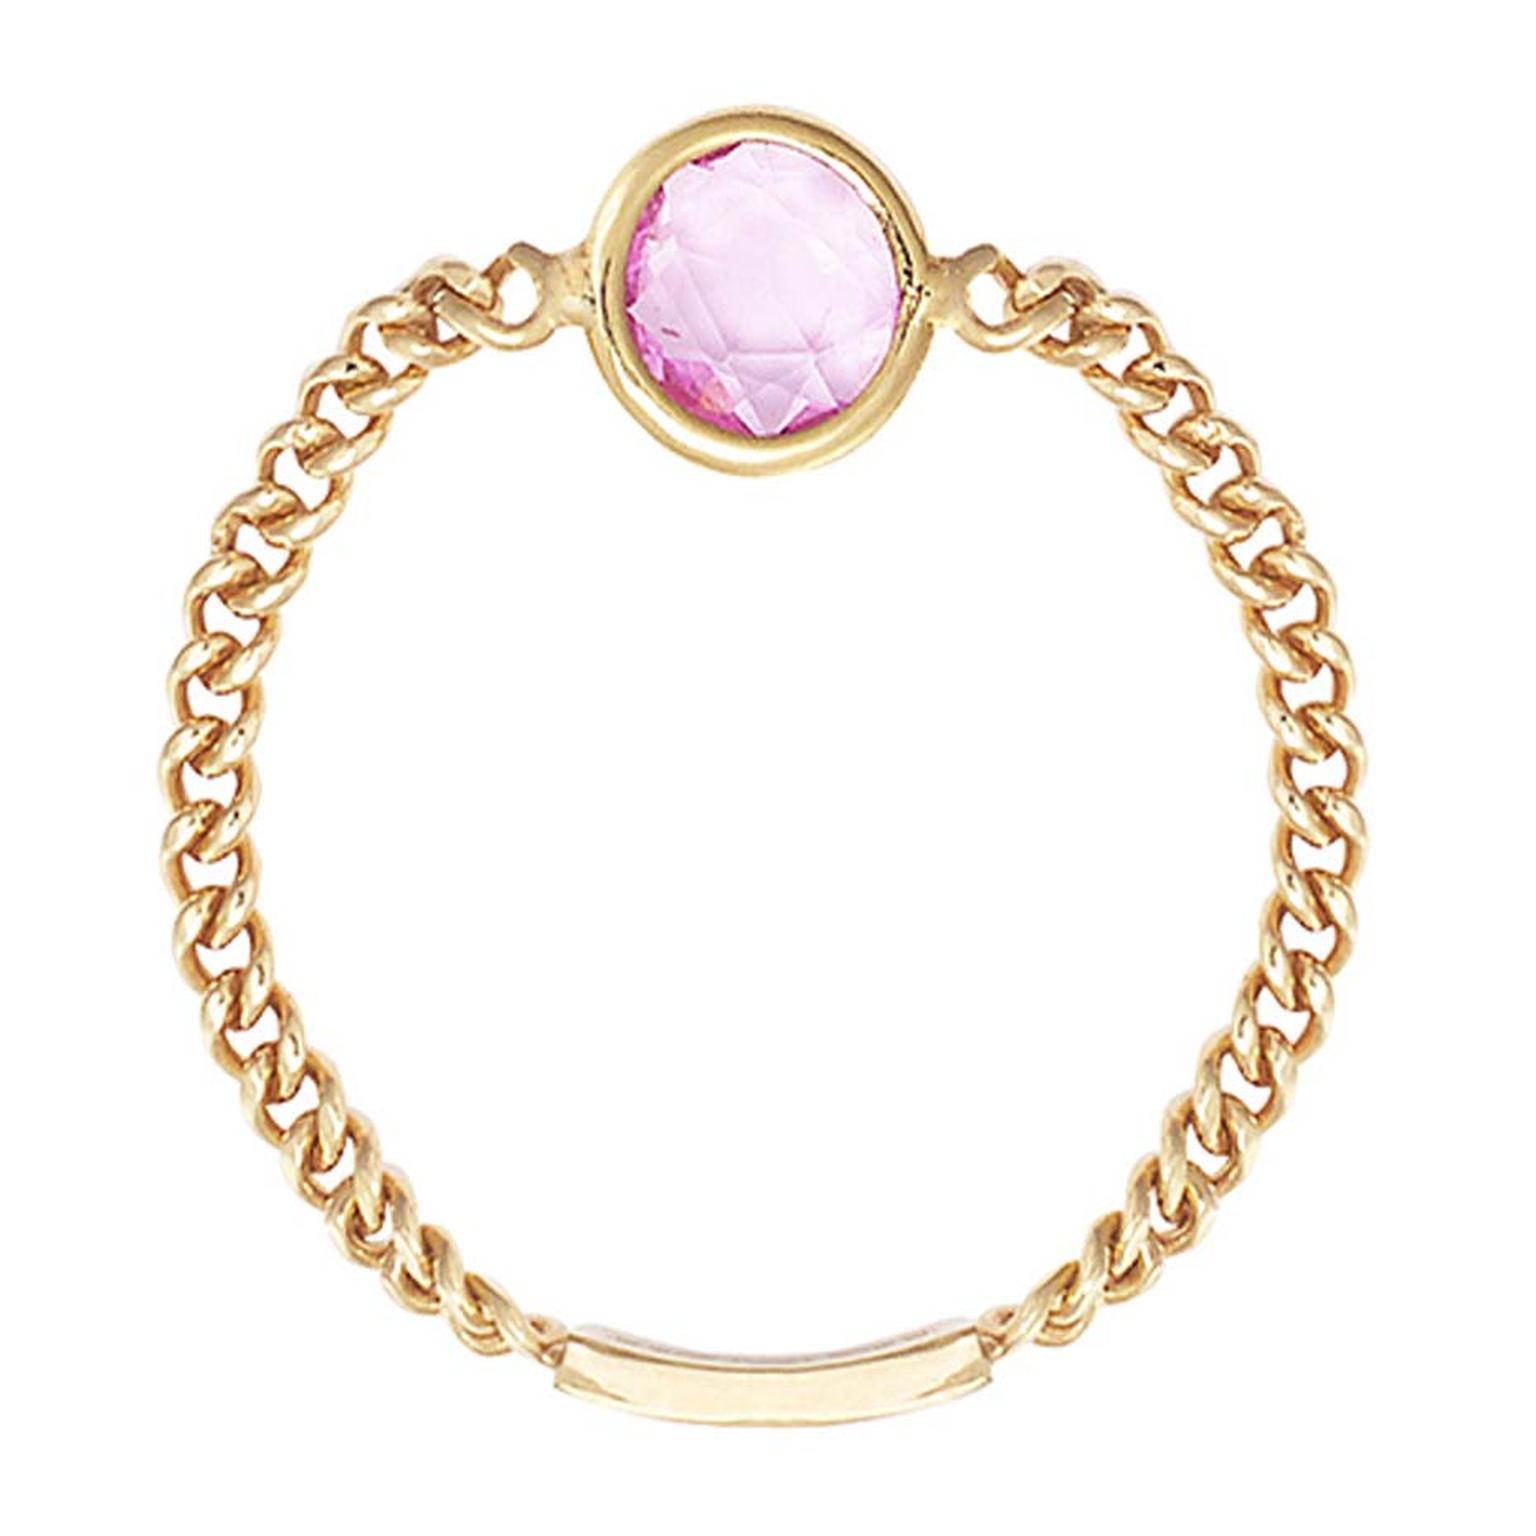 Sweet Pea rose-cut pink sapphire Chain ring in gold.